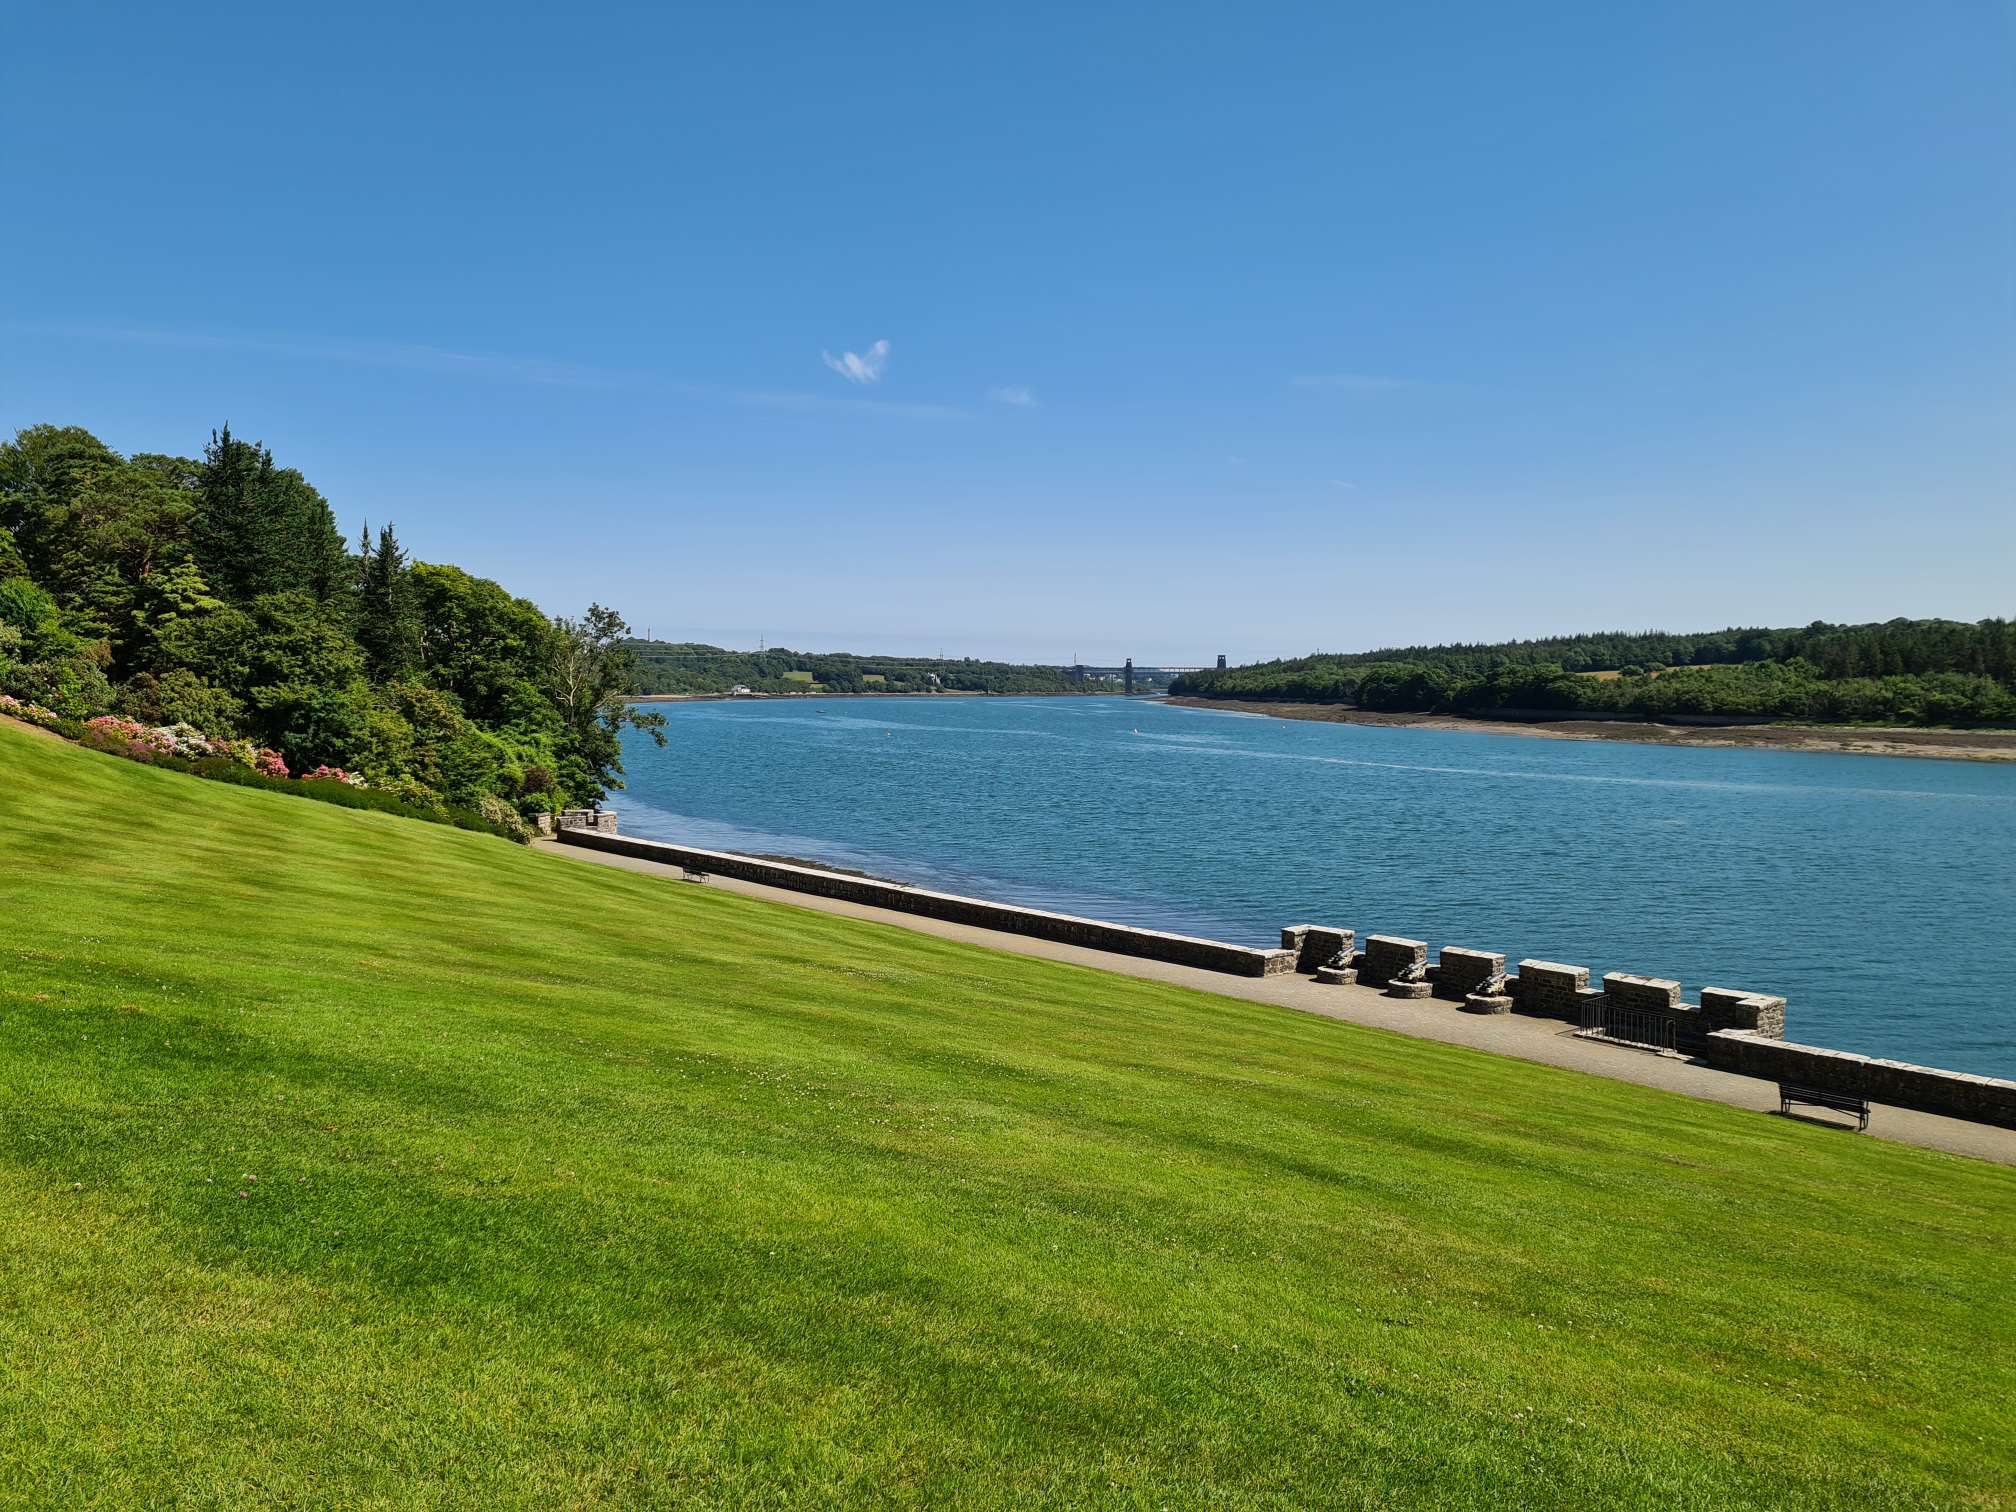 A view of the Menai Strait from Plas Newydd